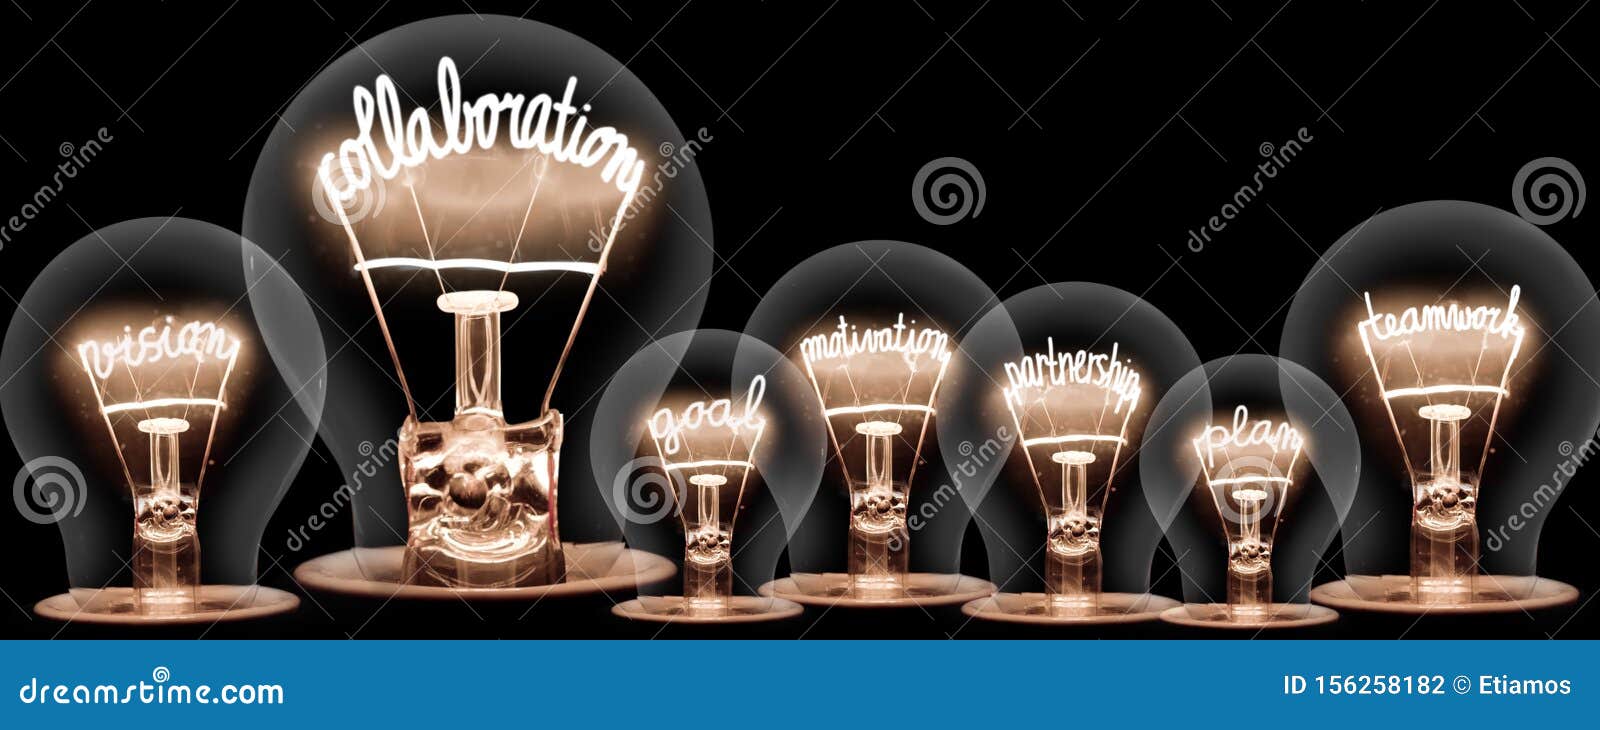 light bulbs with collaboration concept